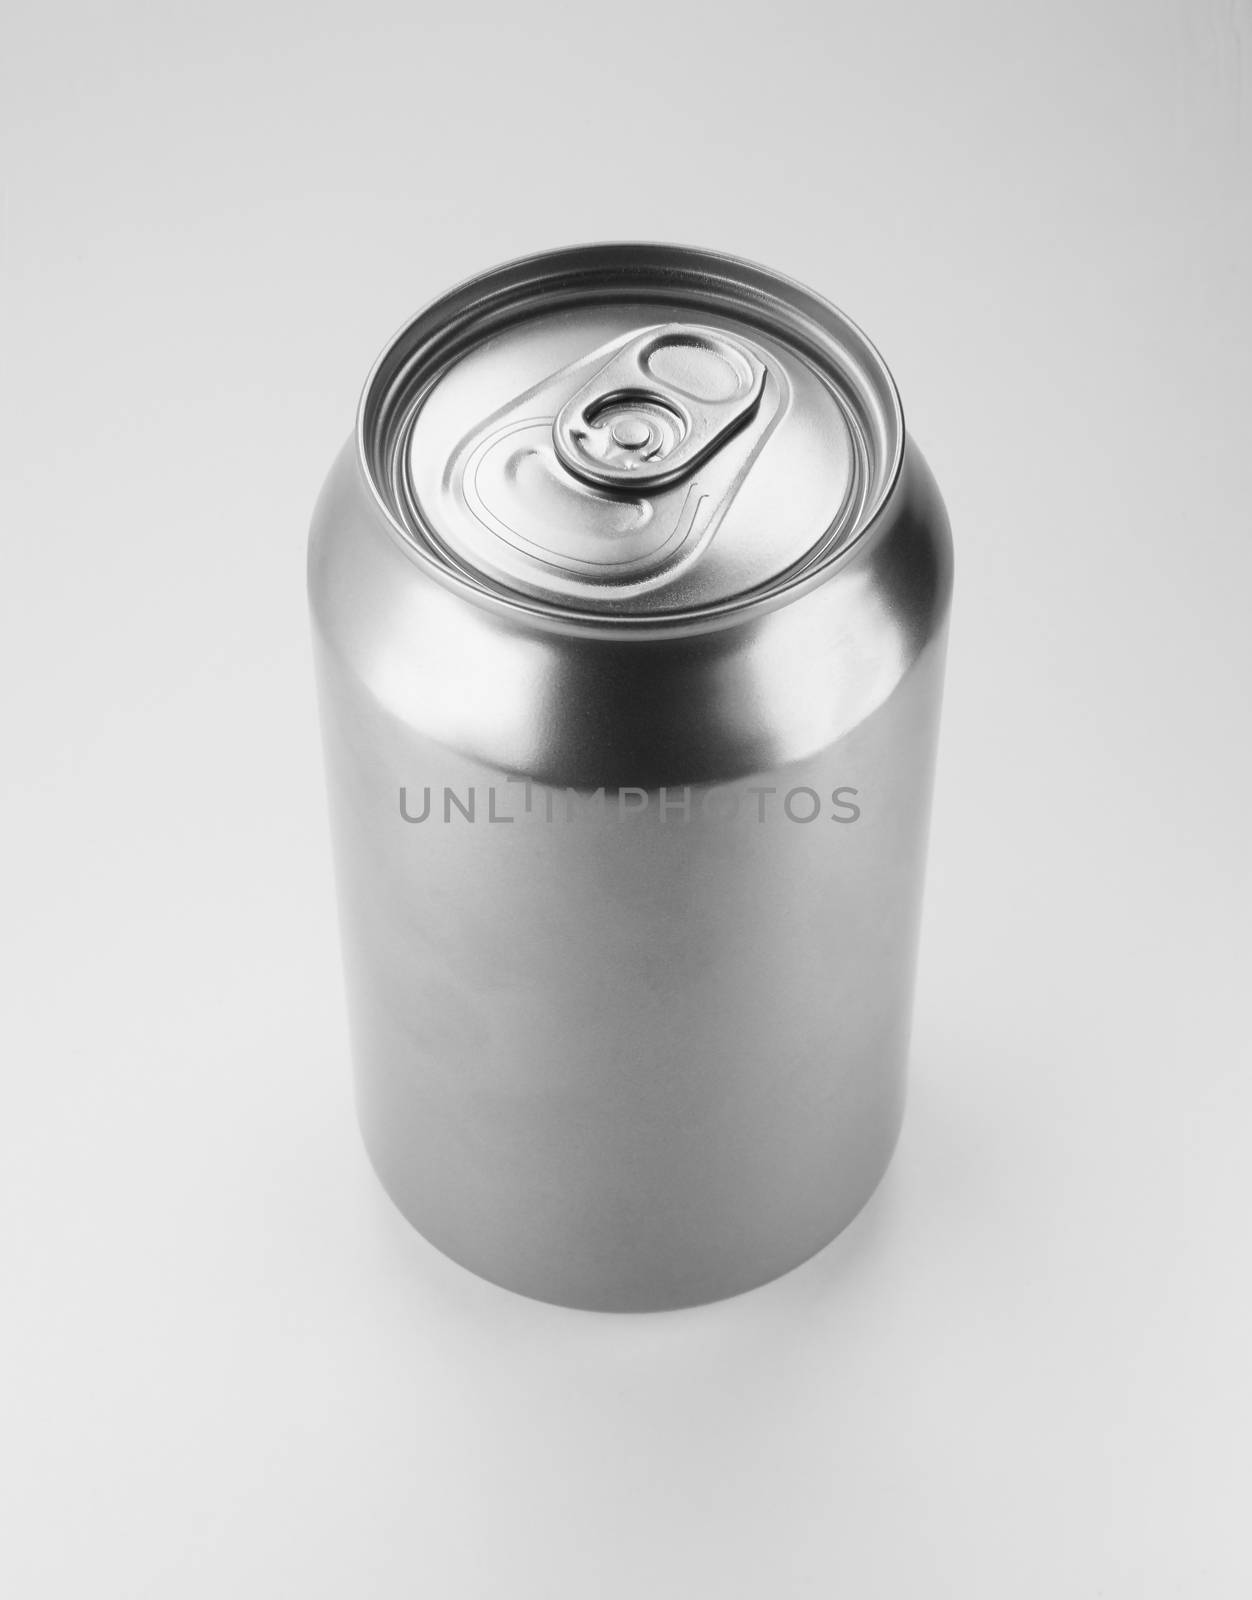 Aluminum can on white background. Clean for your design